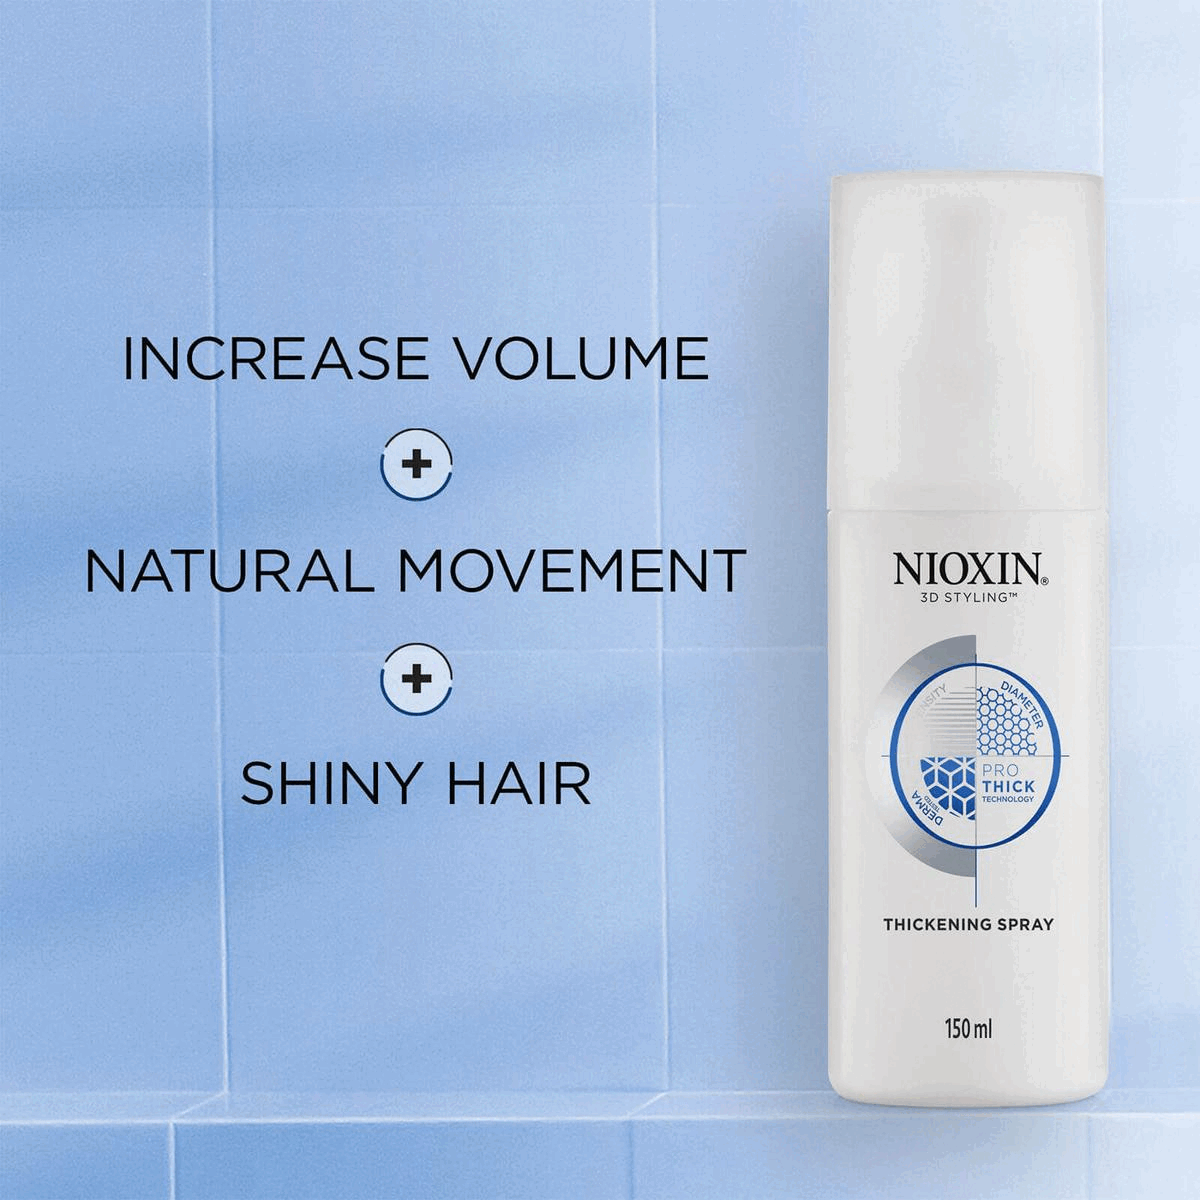 Increase volume + natural movement + shiny hair How to use Nioxin 3D thickening spray? For increase volume and fuller-looking hair 1. Shake before using 2. Spray from roots to ends 3. Blow dry for volume 4. Style as desired Pro Thick Technology


            